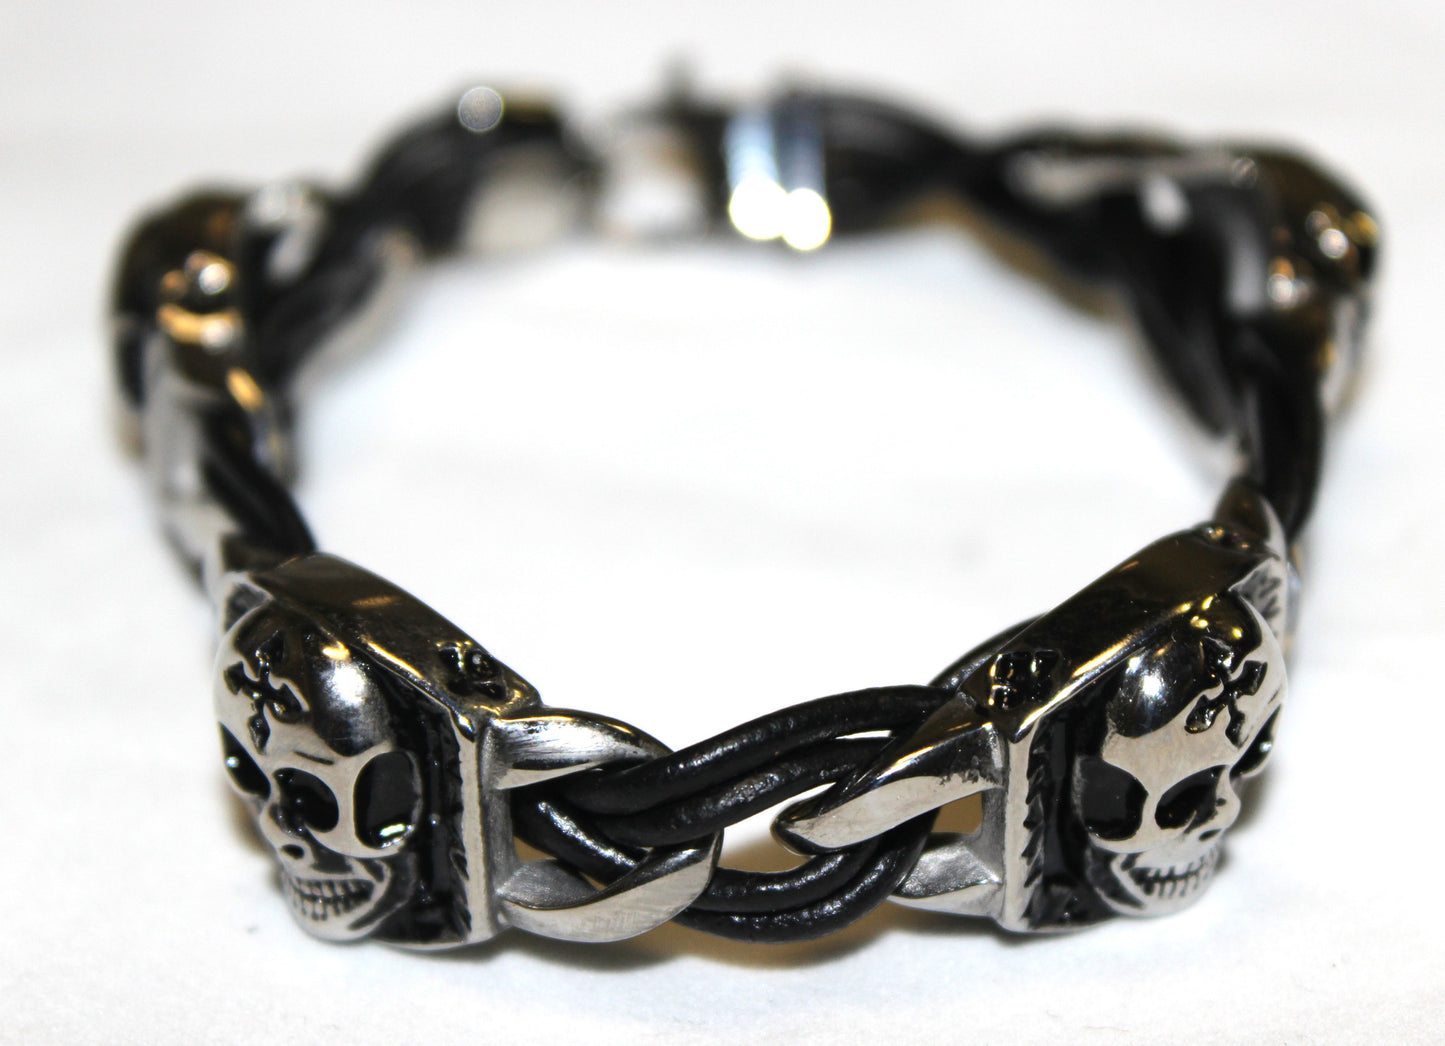 Stainless Steel Skull with Small Cross Leather Bracelet - UDINC0446